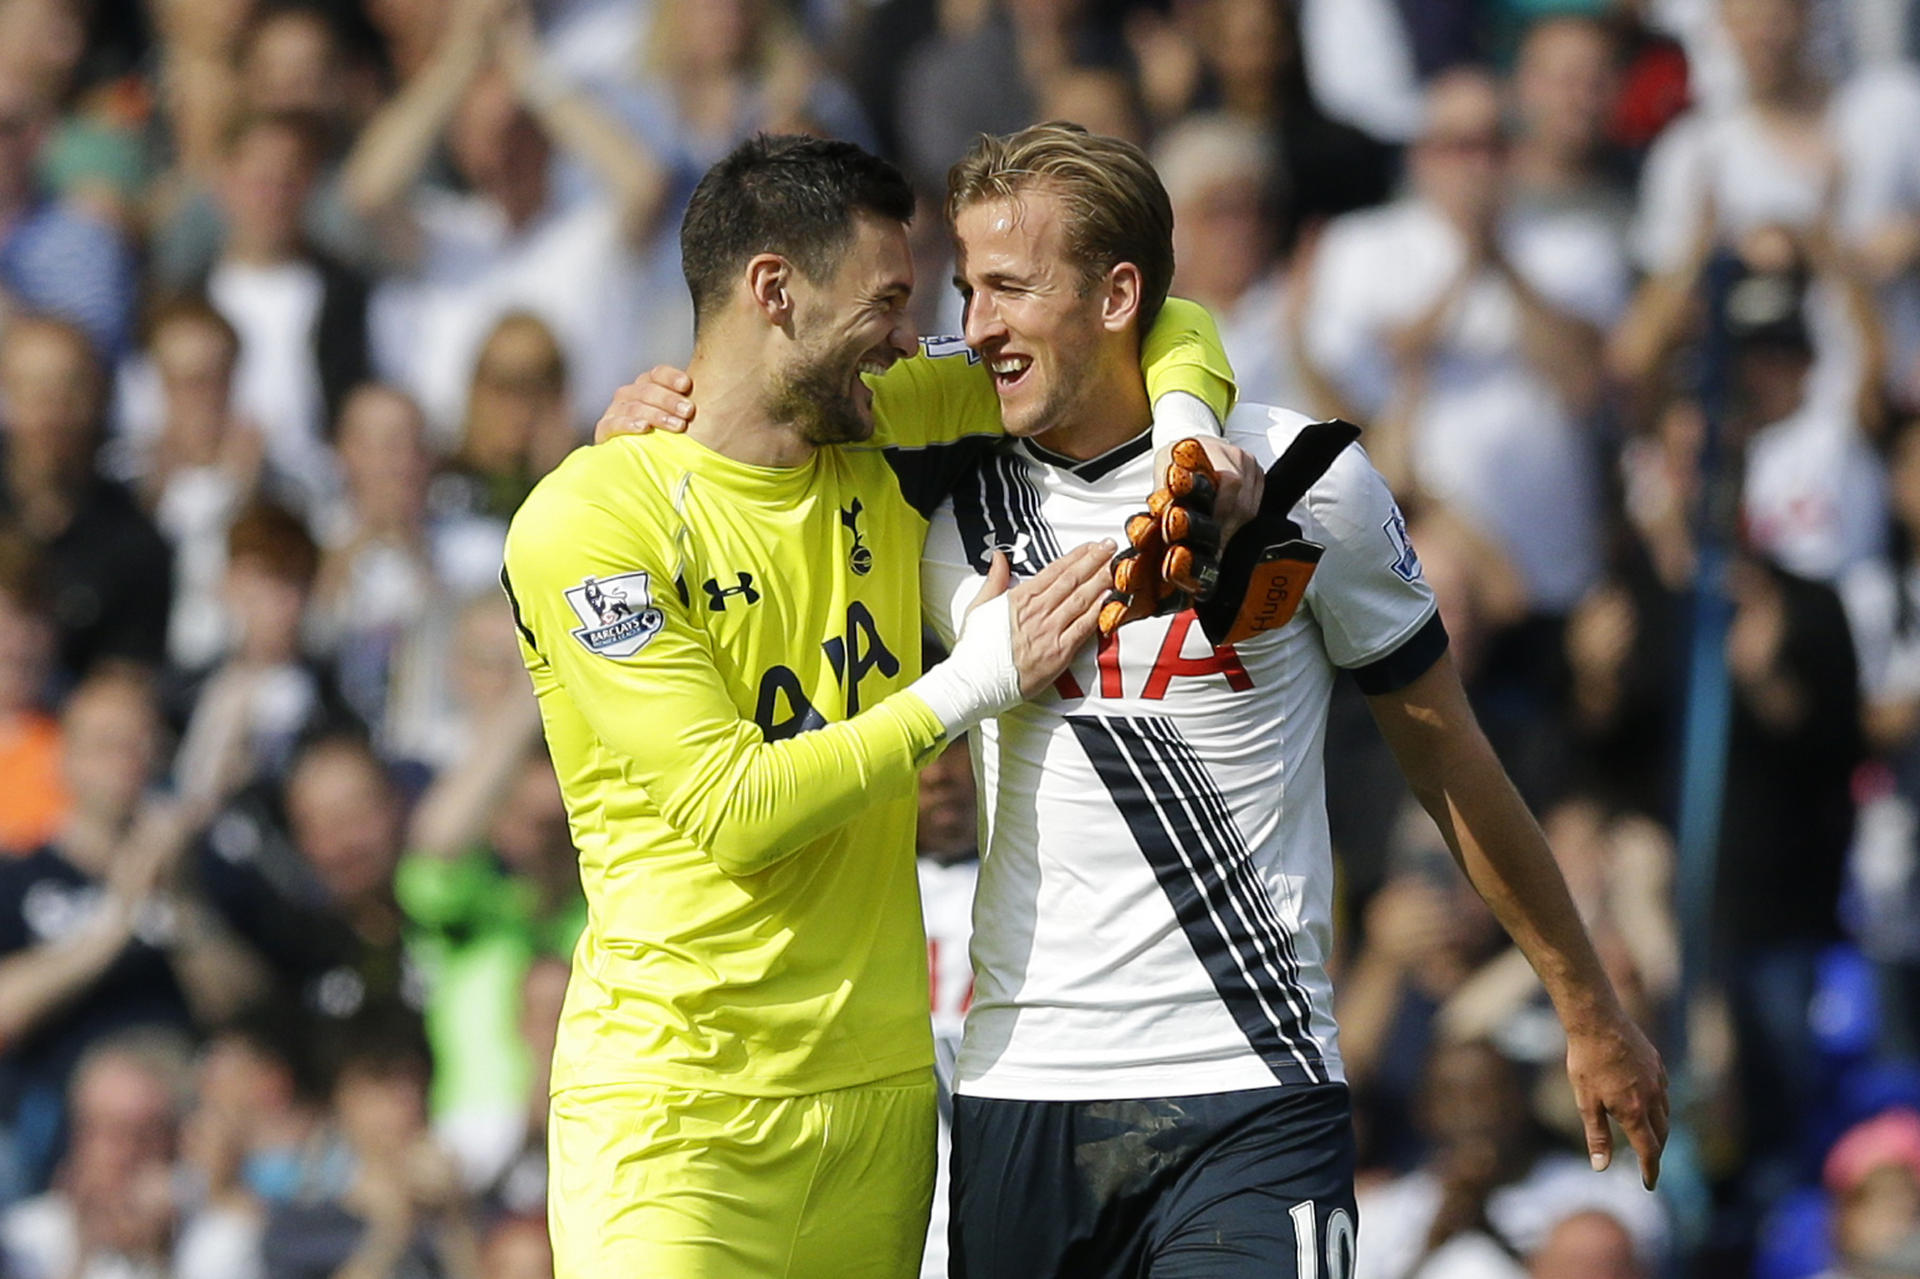 Spurs' goalkeeper Hugo Lloris (left) celebrates with Harry Kane after the team's 4-1 trouncing over City. Photo: AP